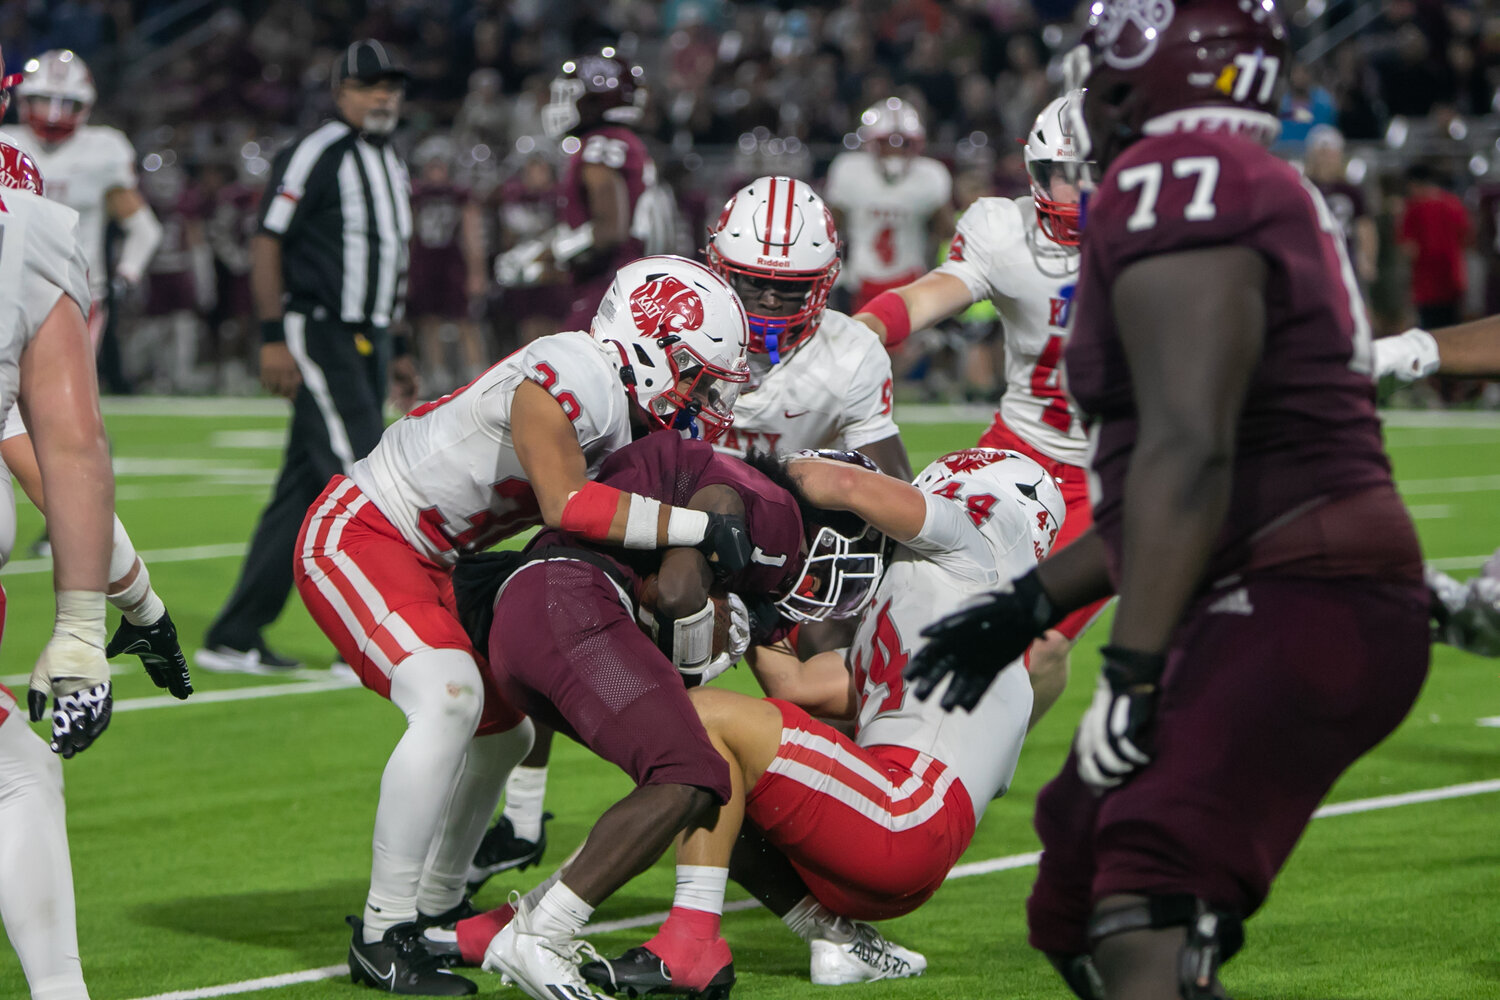 Connor Johnsey brings down a ballcarrier during Friday's area round game between Katy and Cy-Fair at the Berry Center in Cypress.